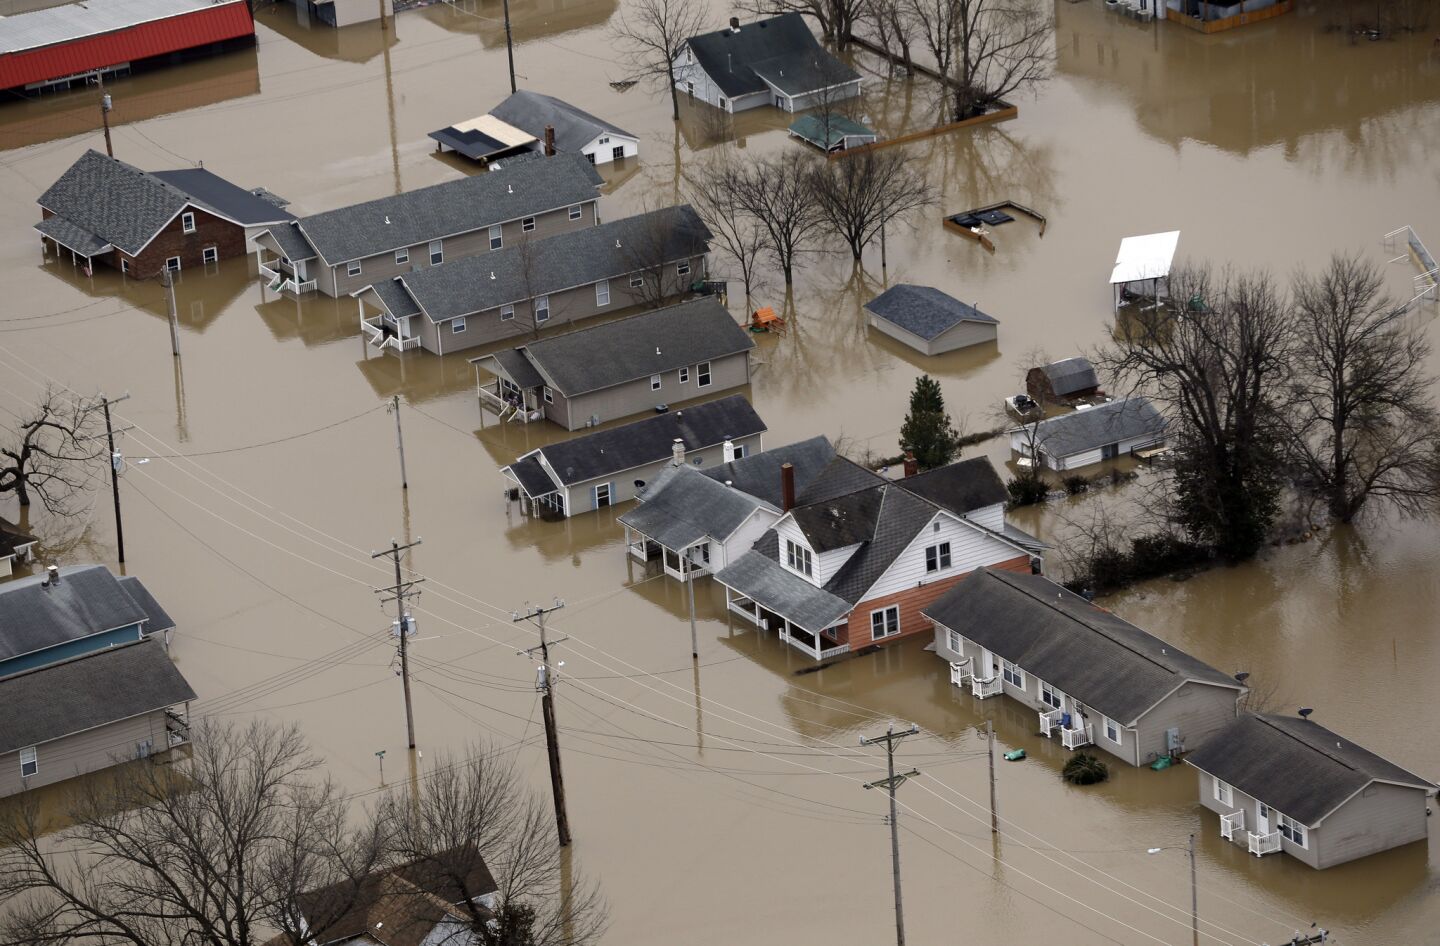 Homes are surrounded by floodwater in Pacific, Mo.